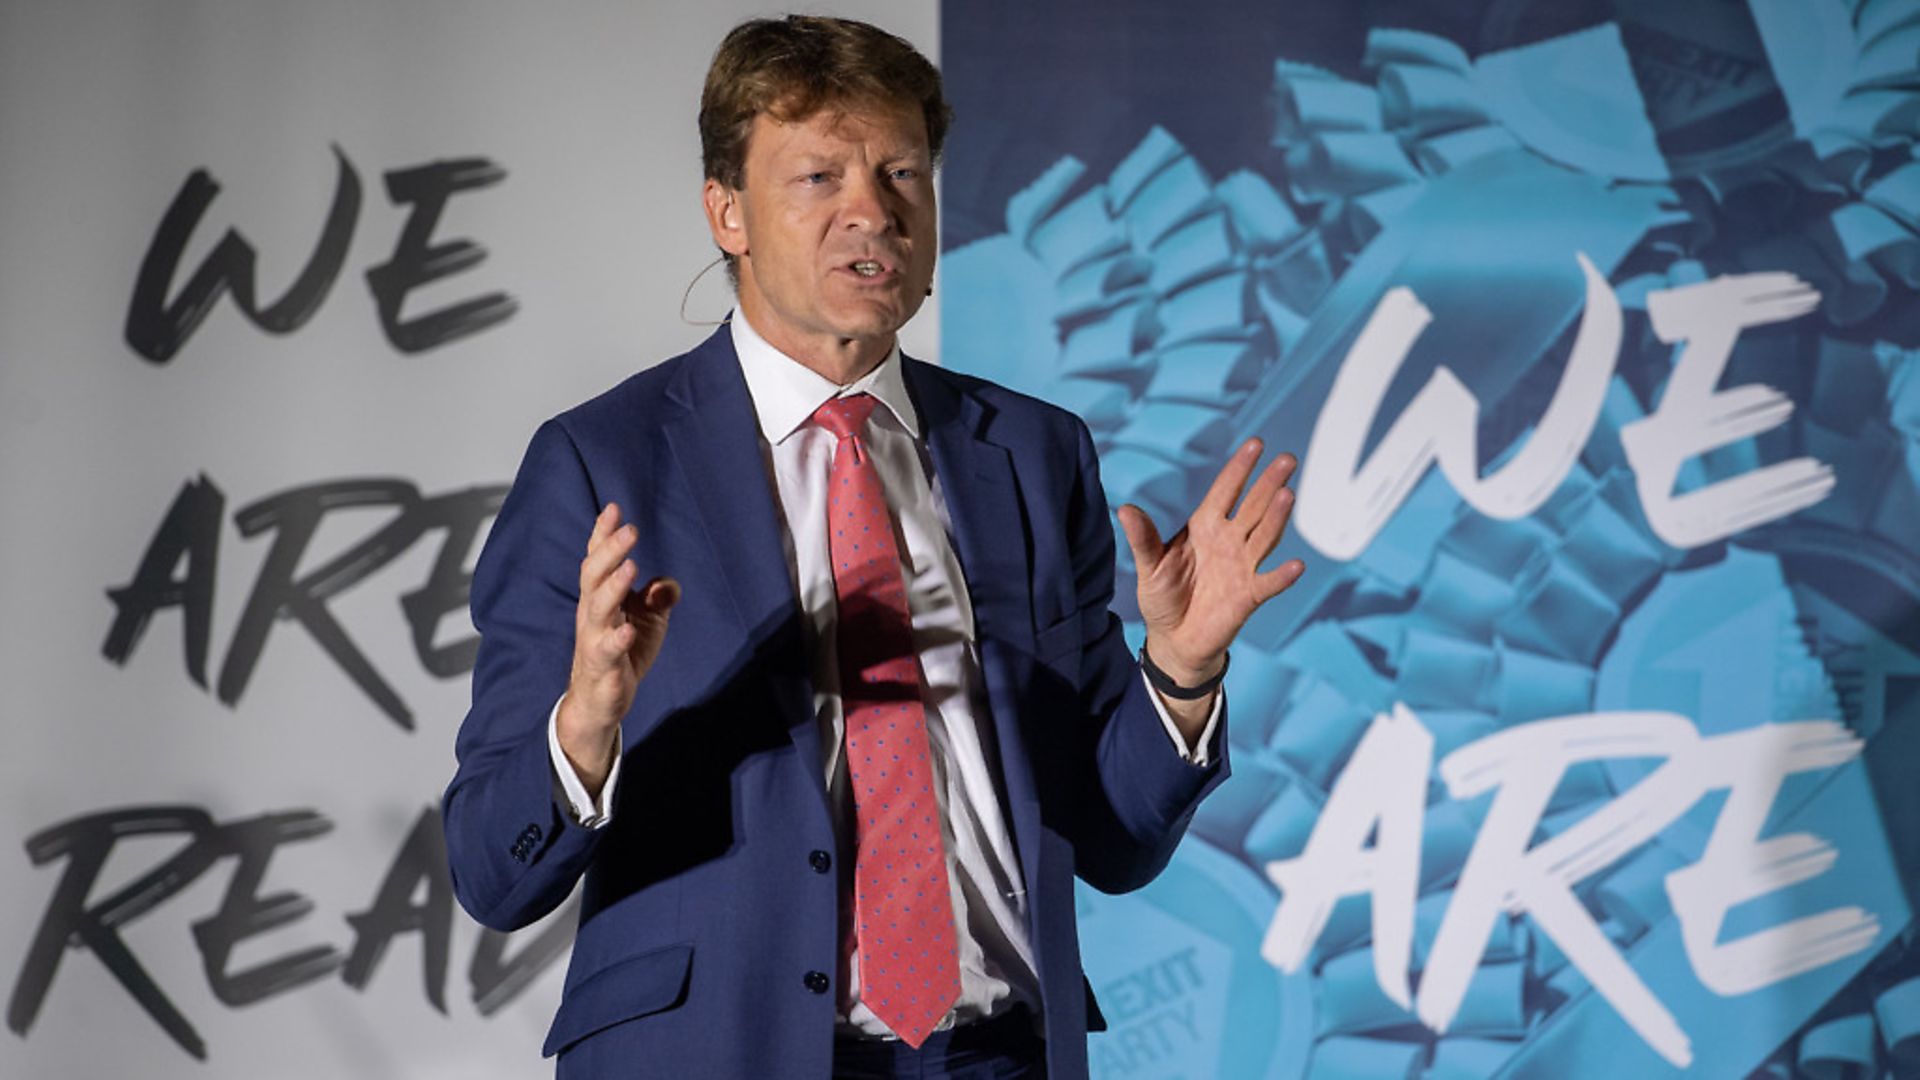 Richard Tice, former chairman of the Brexit Party, is now the new leader of Reform UK - Credit: PA Wire/PA Images